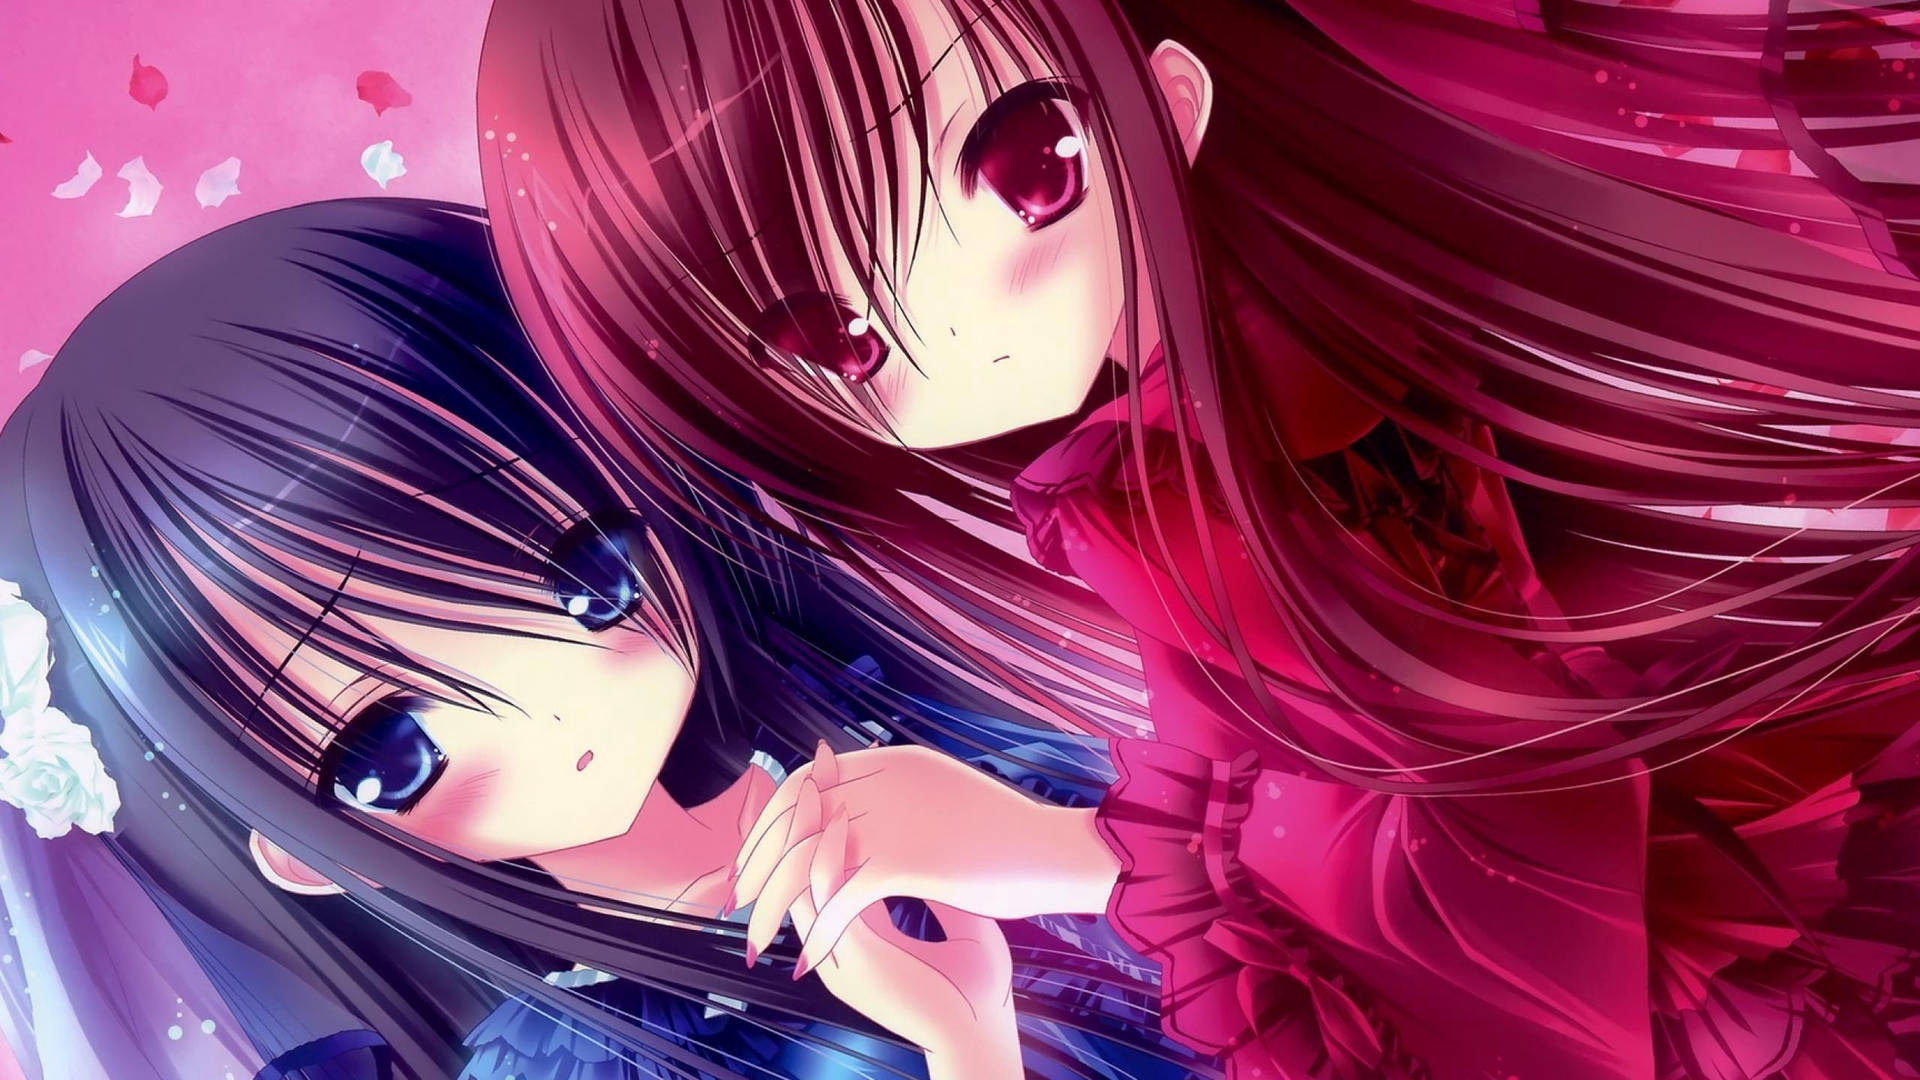 Two Kawaii Anime Girls Blue And Red Wallpaper